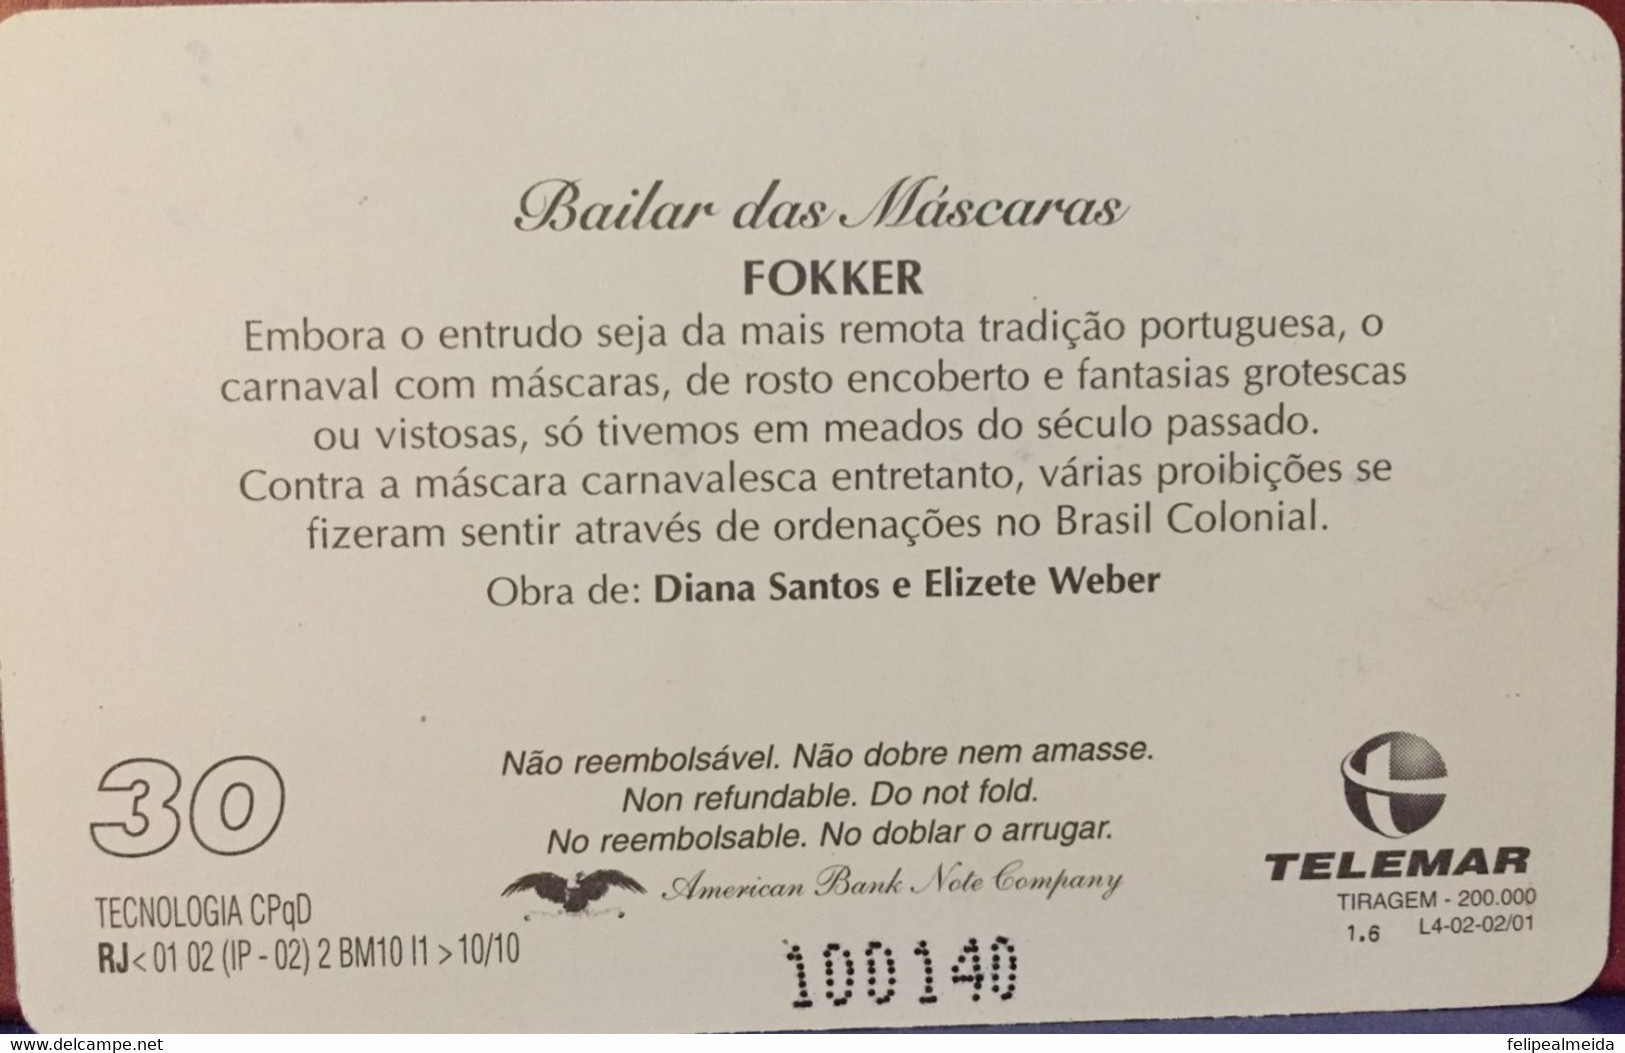 Phone Card Manufactured By Telemar In 2001 - Bailar Das Mascaras - Fokker - Cultural